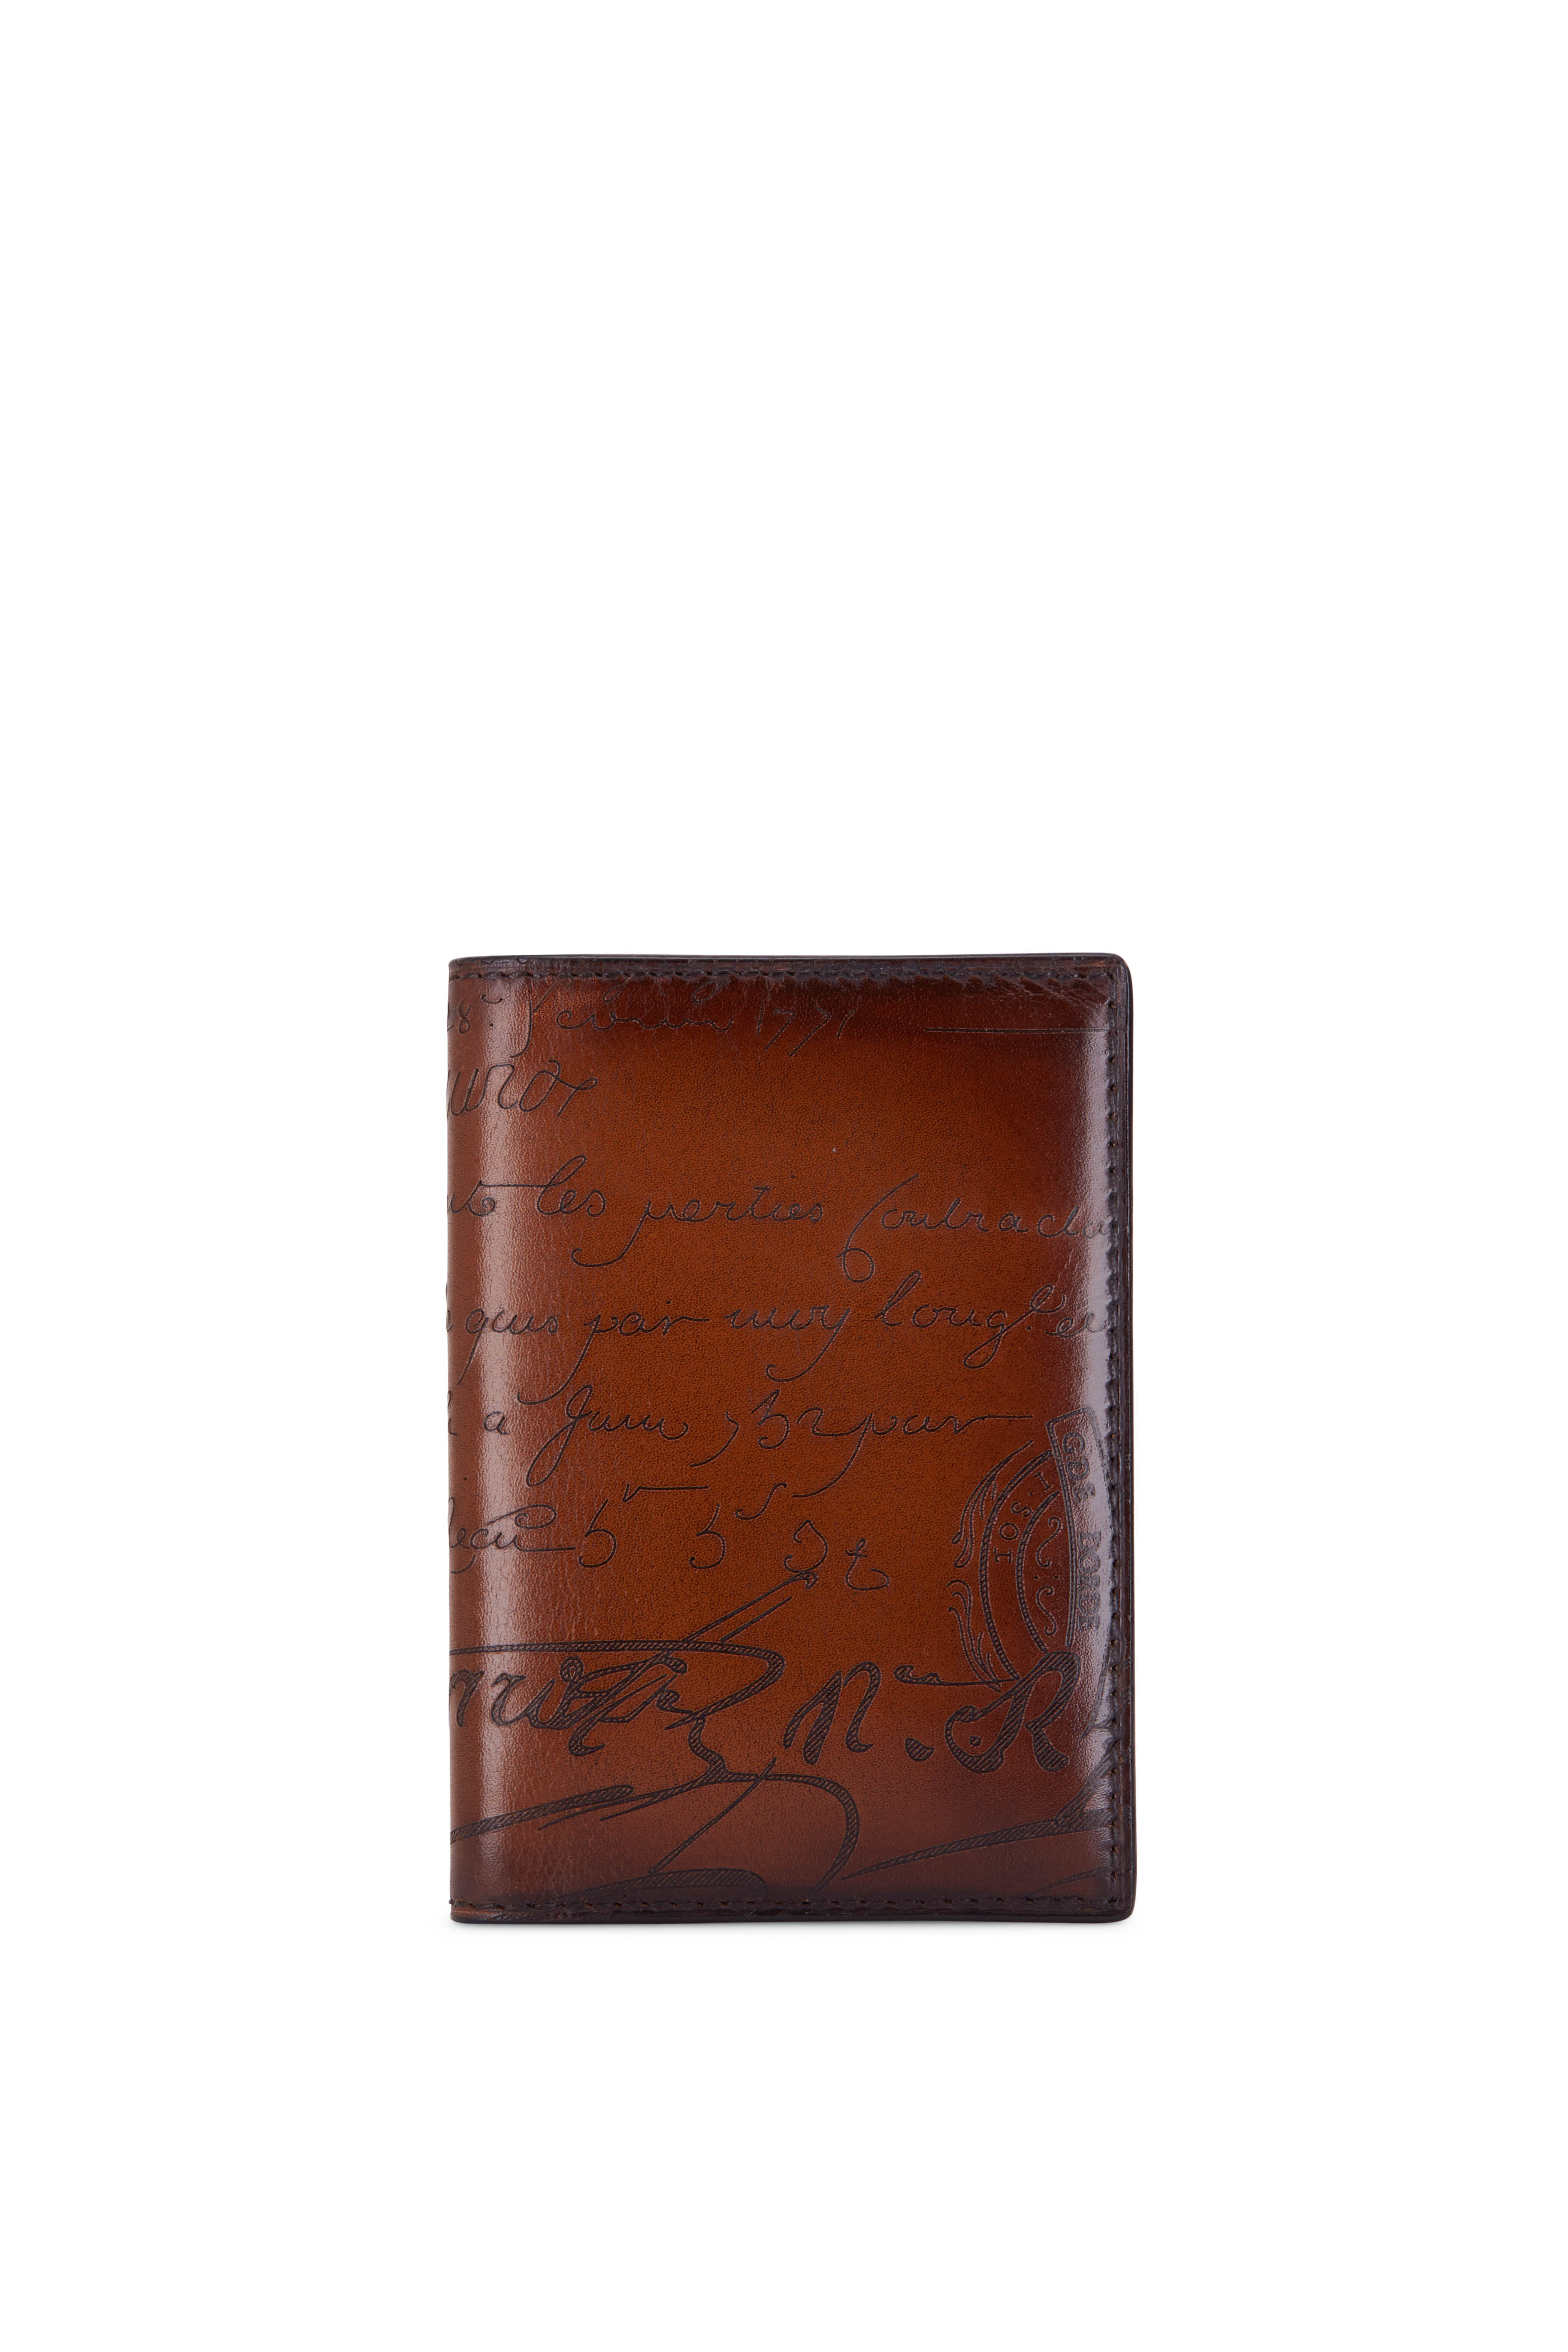 Berluti - Makore Scritto Cacao Leather Two in One Wallet